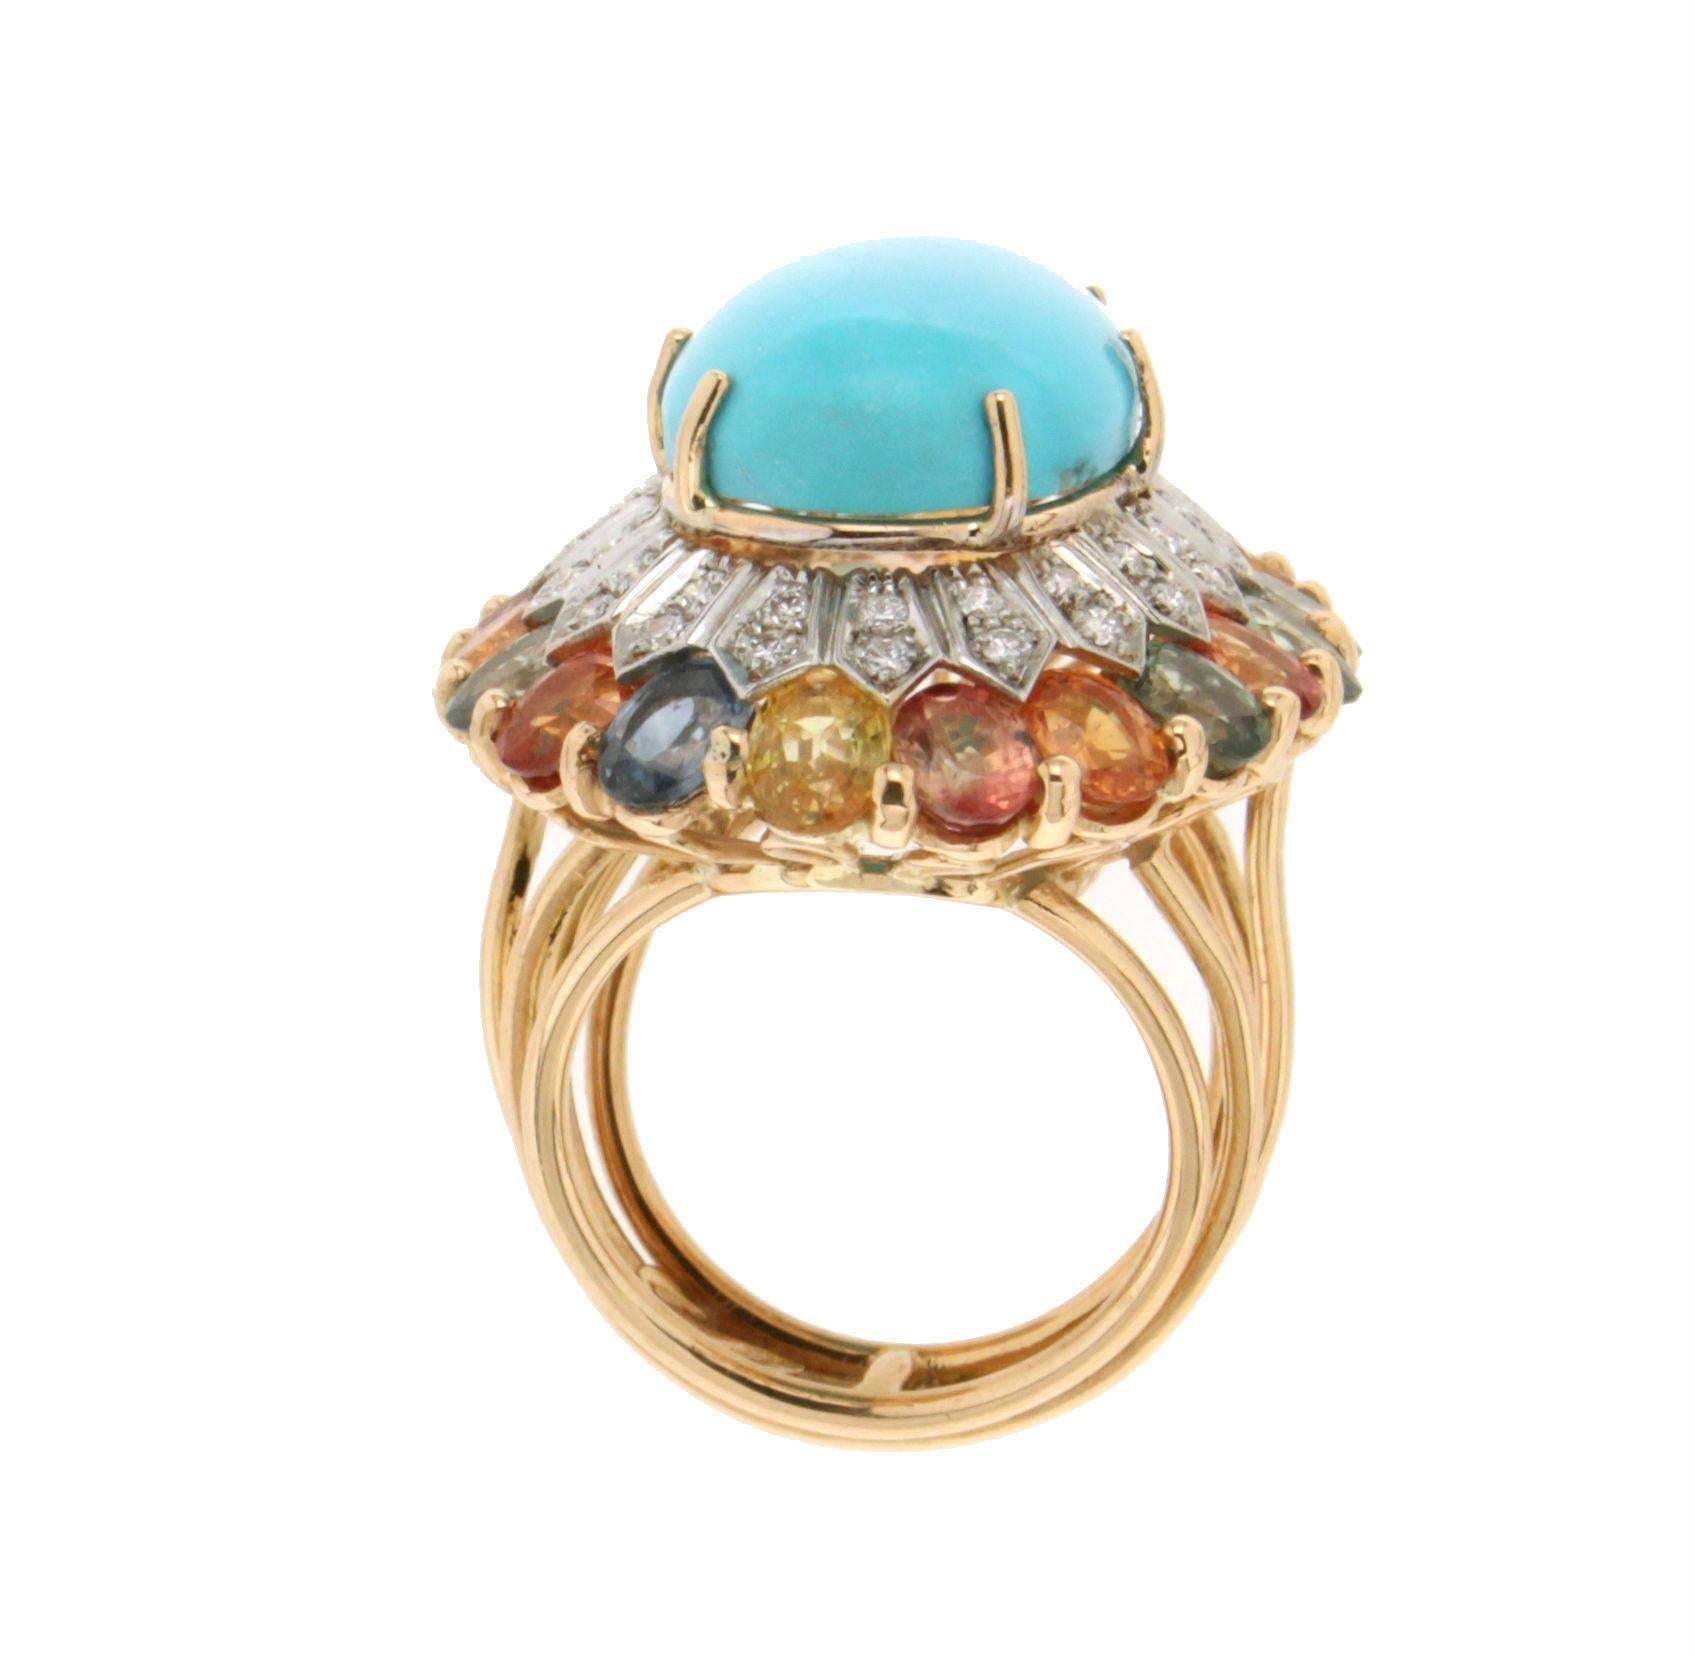 Turquoise, 18 Karat White and Yellow Gold, Diamonds, Sapphires, Cocktail Ring 4